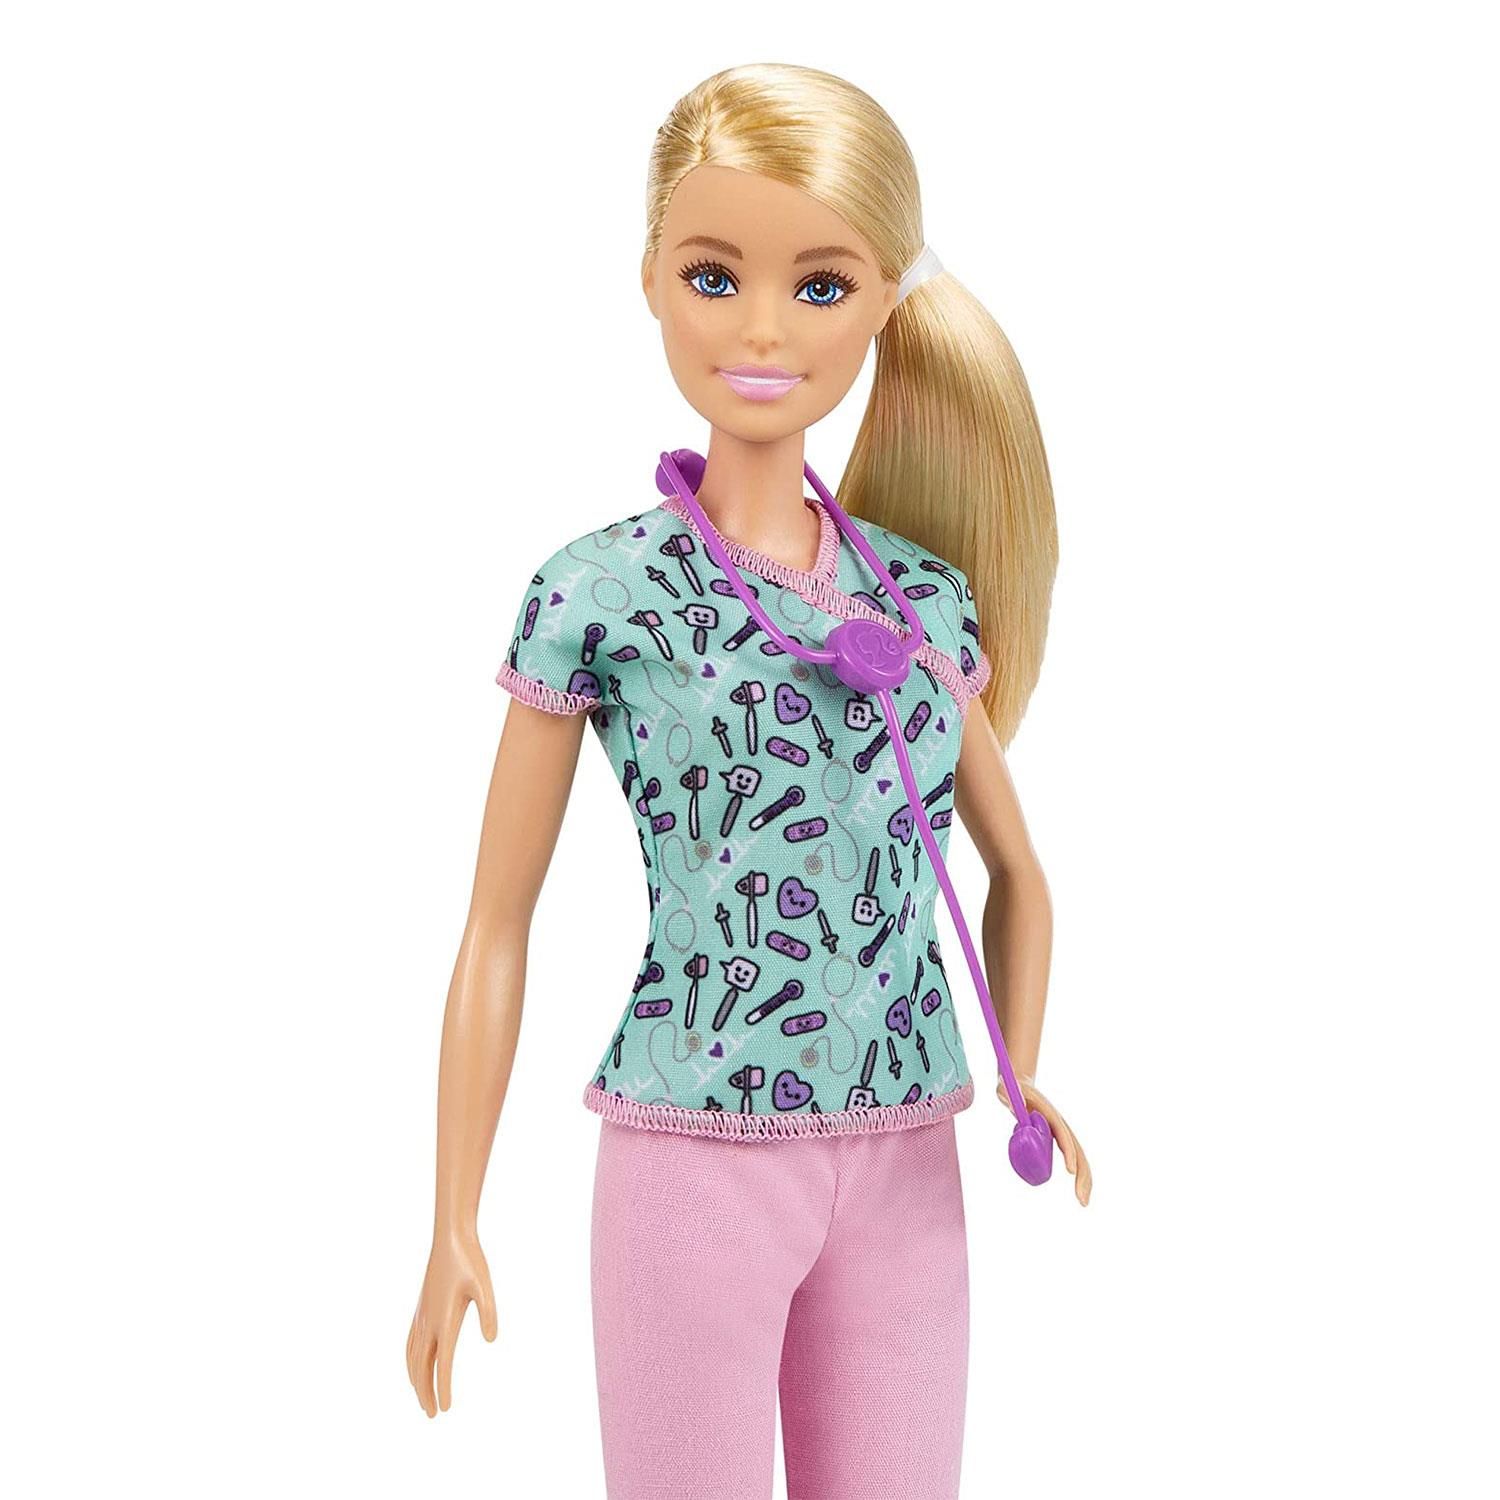 Barbie Careers Nurse Doll with Accessories, Great Toy Gift For 3 Years Old & Up

Explore a world of caretaking career fun with the Barbie nurse doll! When a girl plays with Barbie, she imagines everything she can become, and if you love taking care of and helping others, you can be a nurse! The Barbie nurse doll (12-in/30.40-cm) wears cute scrubs featuring a medical-tool print top and pink pants, white shoes and a sleek ponytail. She also comes with a stethoscope that hangs around her neck. Kids will love the endless possibilities for creative expression and storytelling fun. Doll cannot stand alone. Colours and decorations may vary. Makes a great gift for ages 3 years old and up.

Features:

​Explore caretaking career fun with the Barbie nurse doll and related accessories!
​Wearing cute scrubs featuring a medical-tool print top, pink pants and white shoes, a Barbie nurse doll (12-in/30.40-cm) is ready to make her rounds and check on patients!
​Place the stethoscope around the Barbie nurse doll's neck for realistic play.
​Explore a world of creative storytelling fun with the Barbie nurse doll!
​Makes a great gift for kids 3 years old and up, especially those interested in caretaking and helping others!

Specifications:

Toy Type: Barbie Careers Nurse Doll
Colour: Green
Material: Abs Plastic
Age Range:  3 Years & Above

Box Contains: Barbie Careers Nurse Doll with Accessories